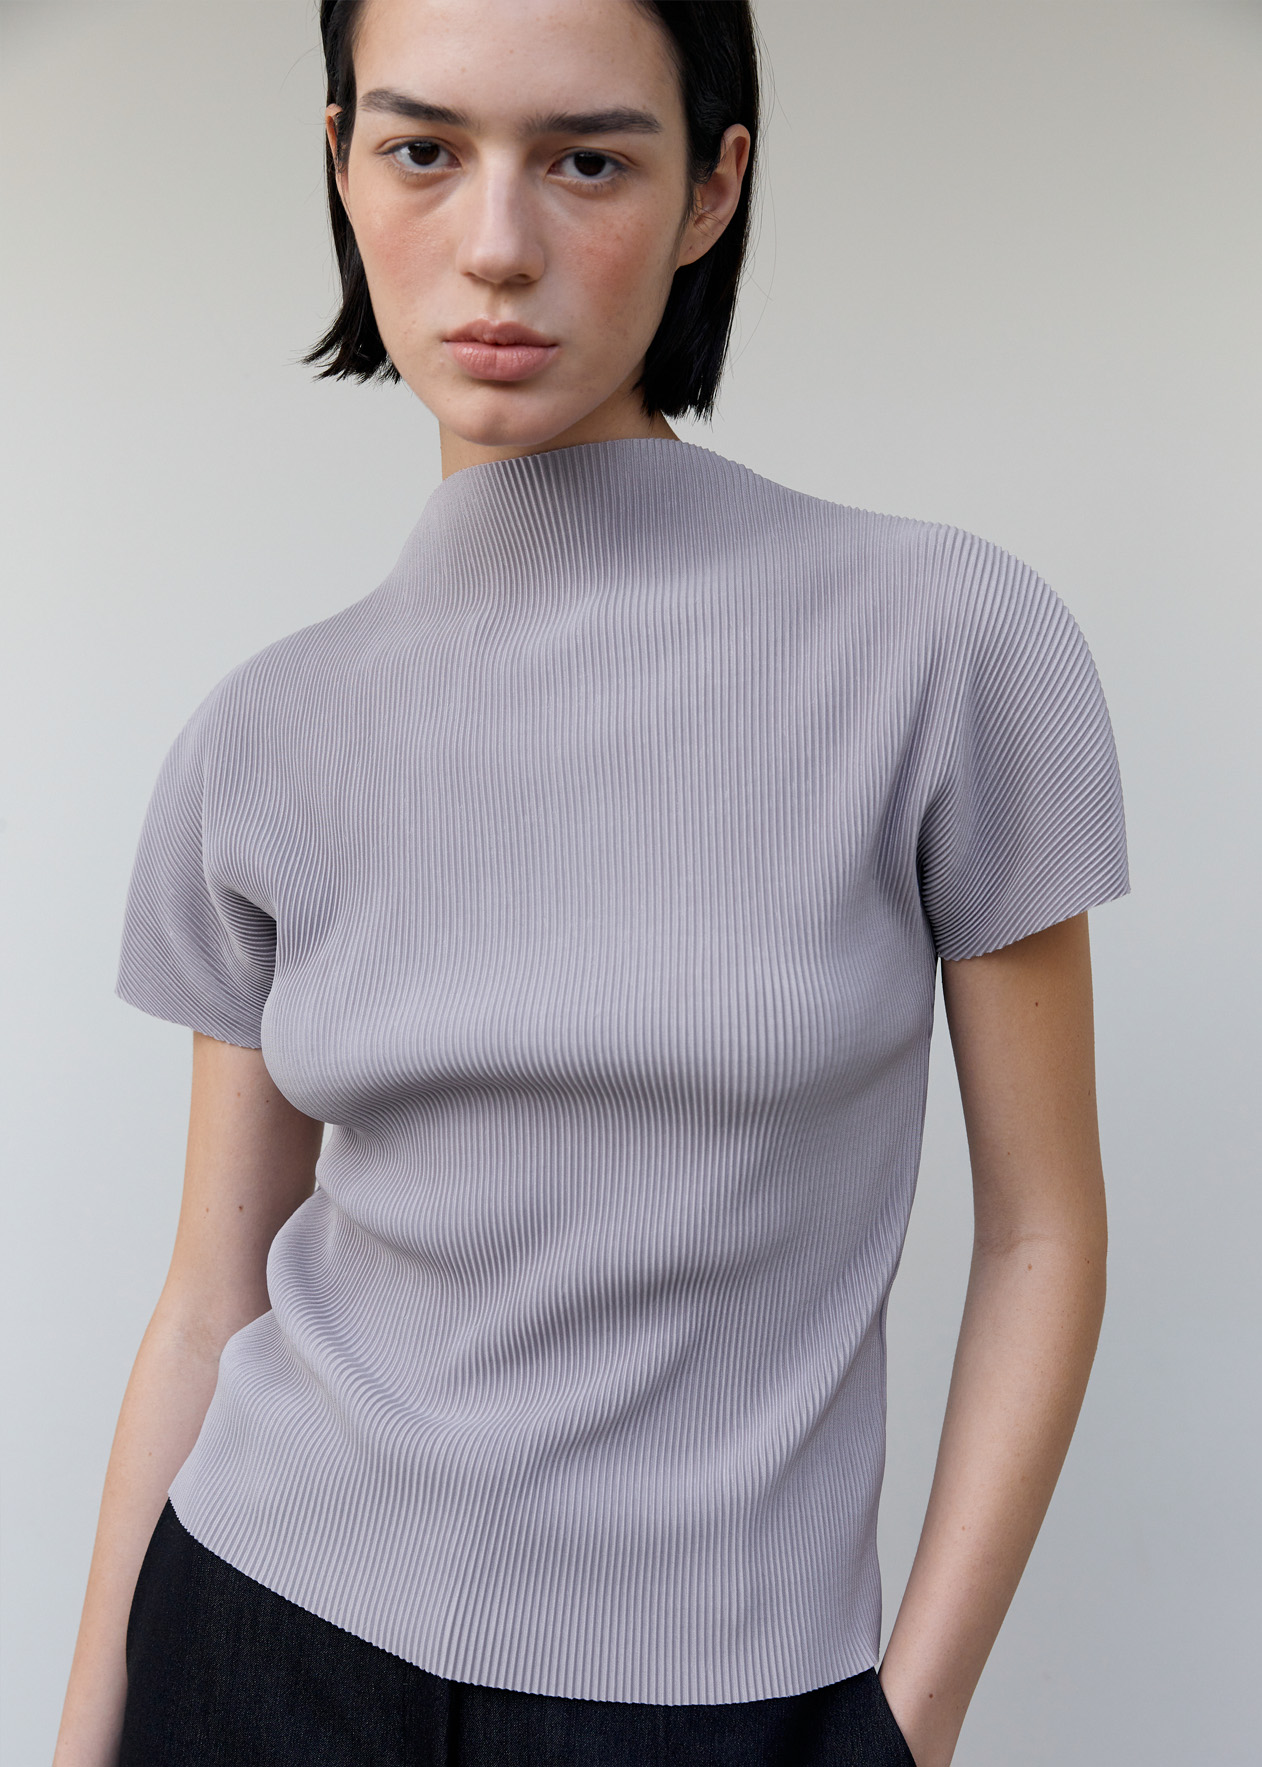 pleated t-shirt